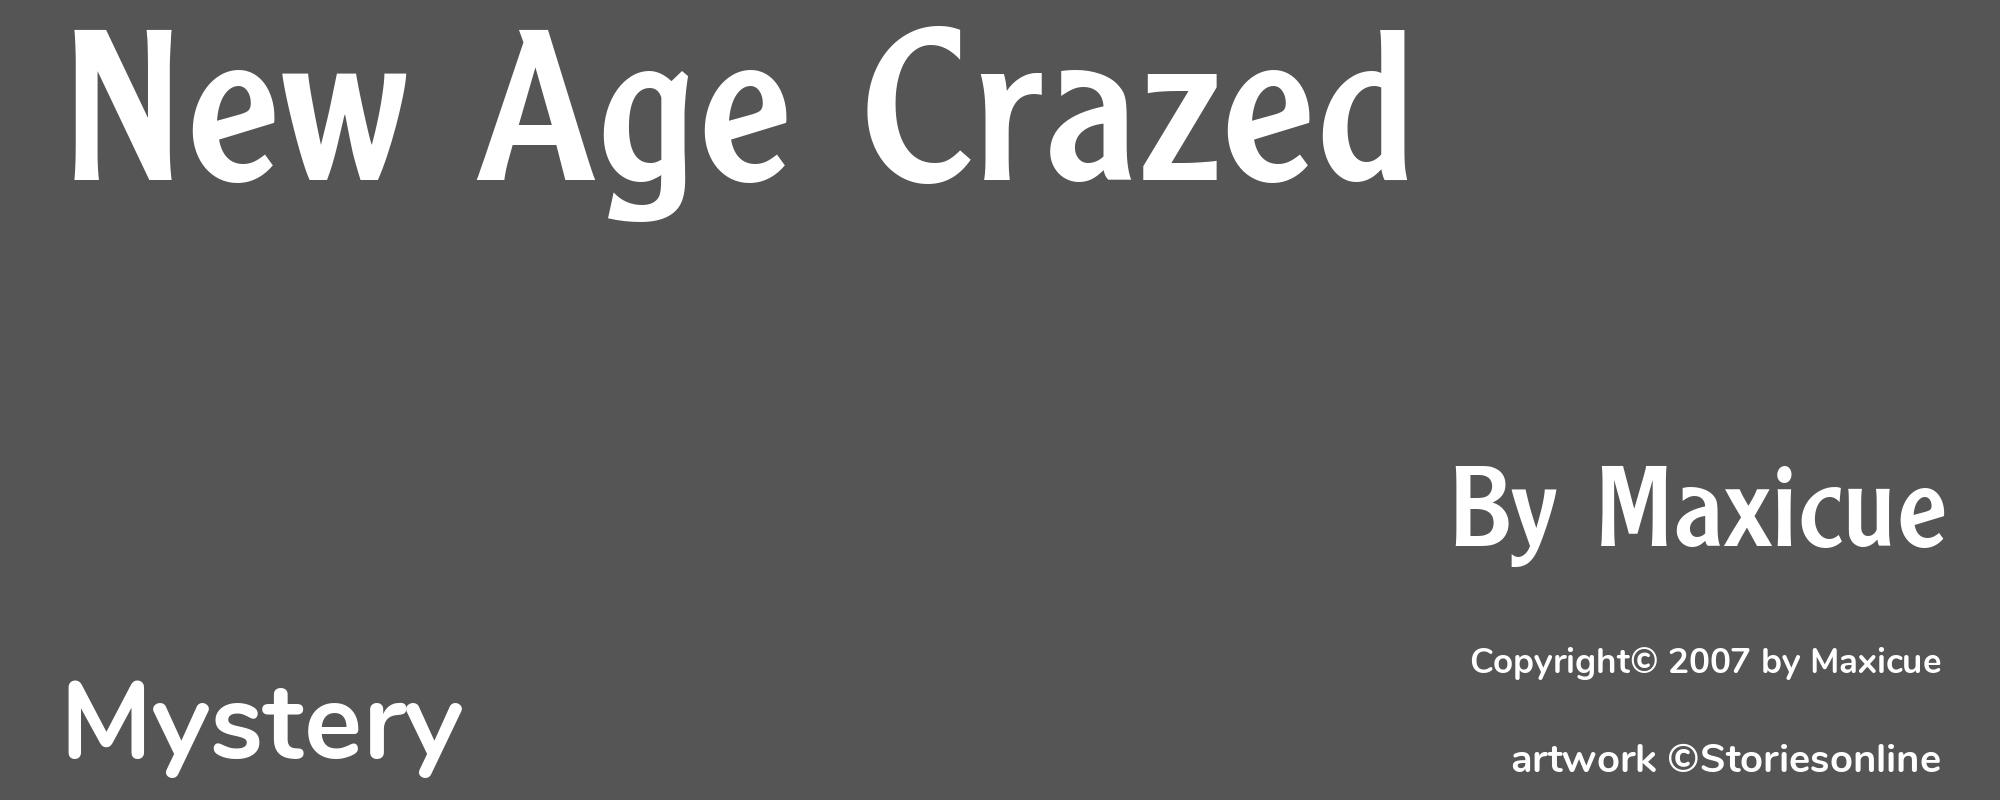 New Age Crazed - Cover